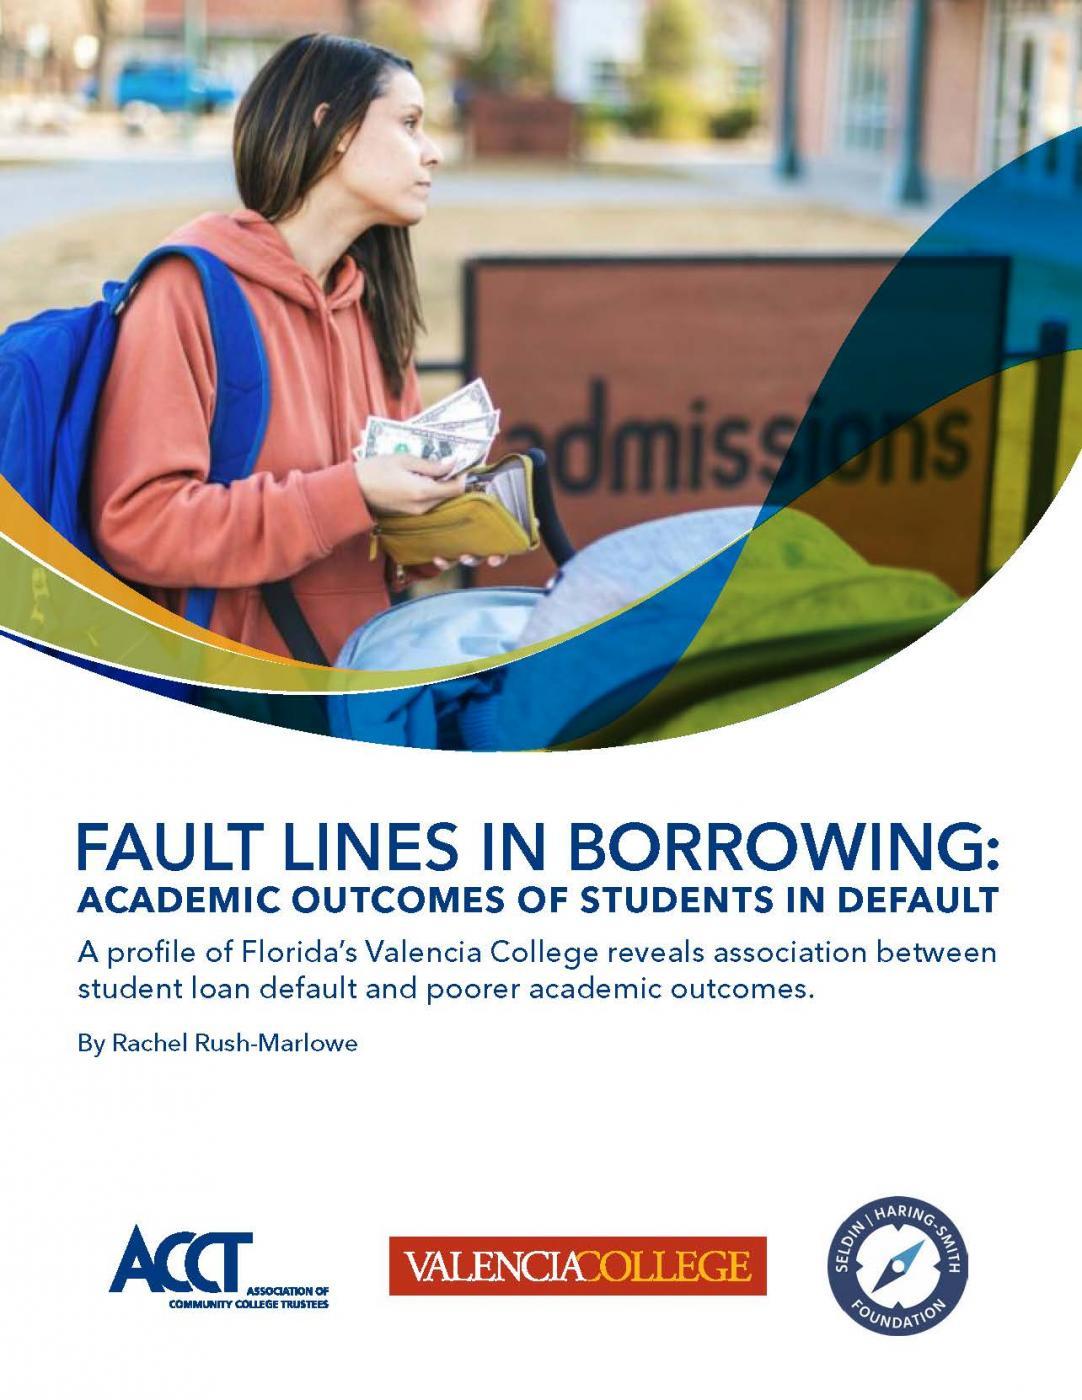 Fault Lines in Borrowing: Academic Outcomes of Students in Default (2020)